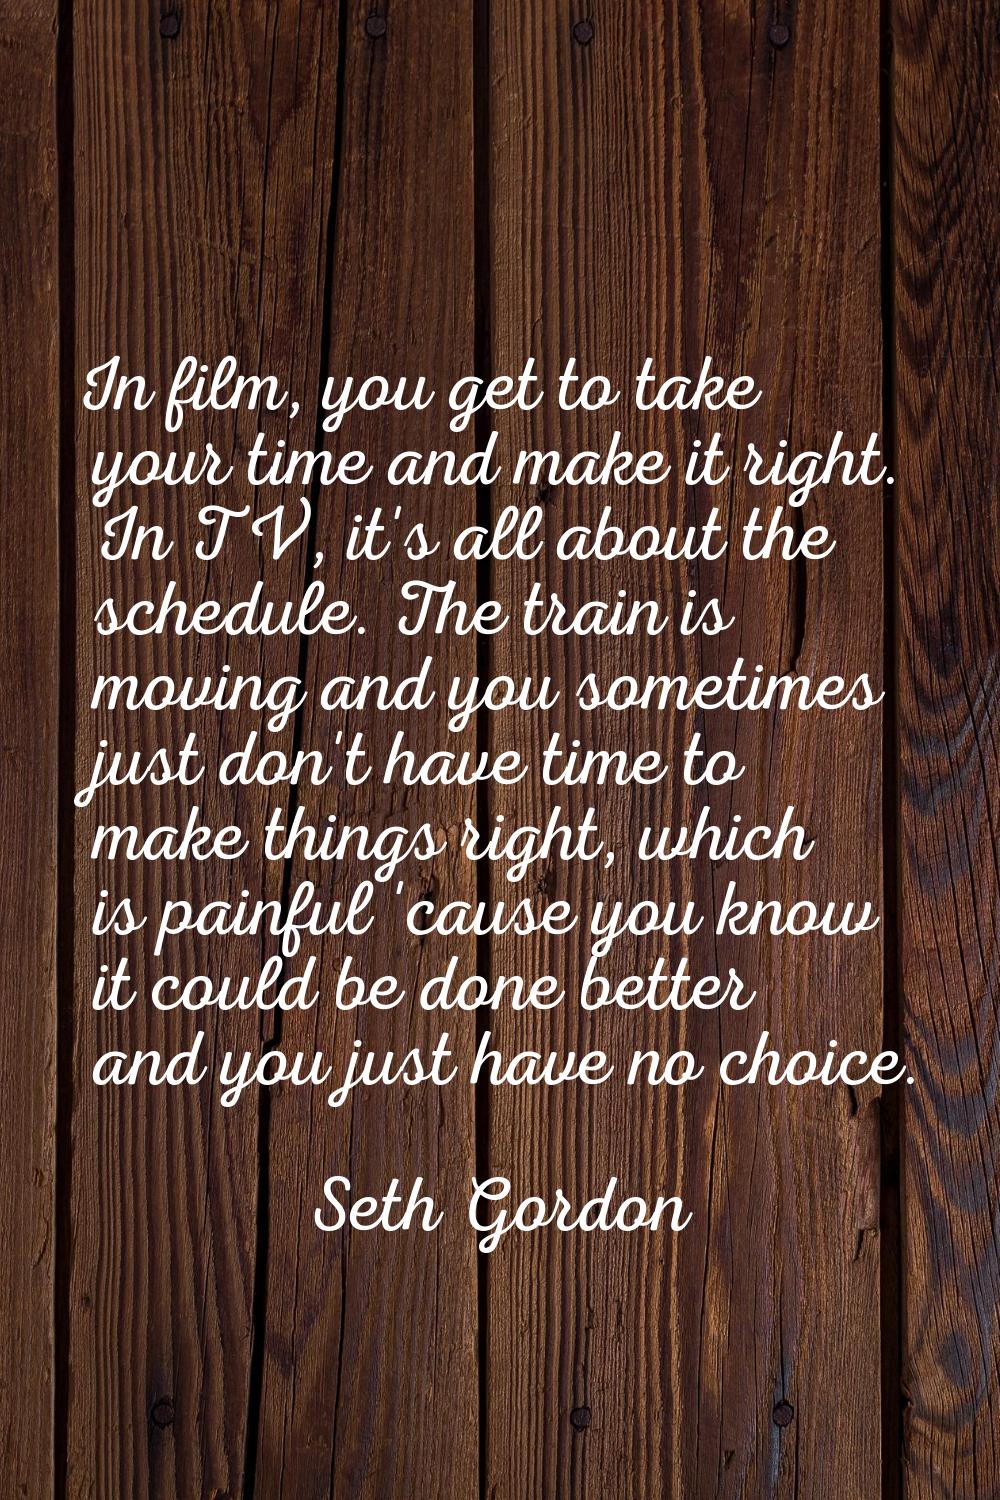 In film, you get to take your time and make it right. In TV, it's all about the schedule. The train